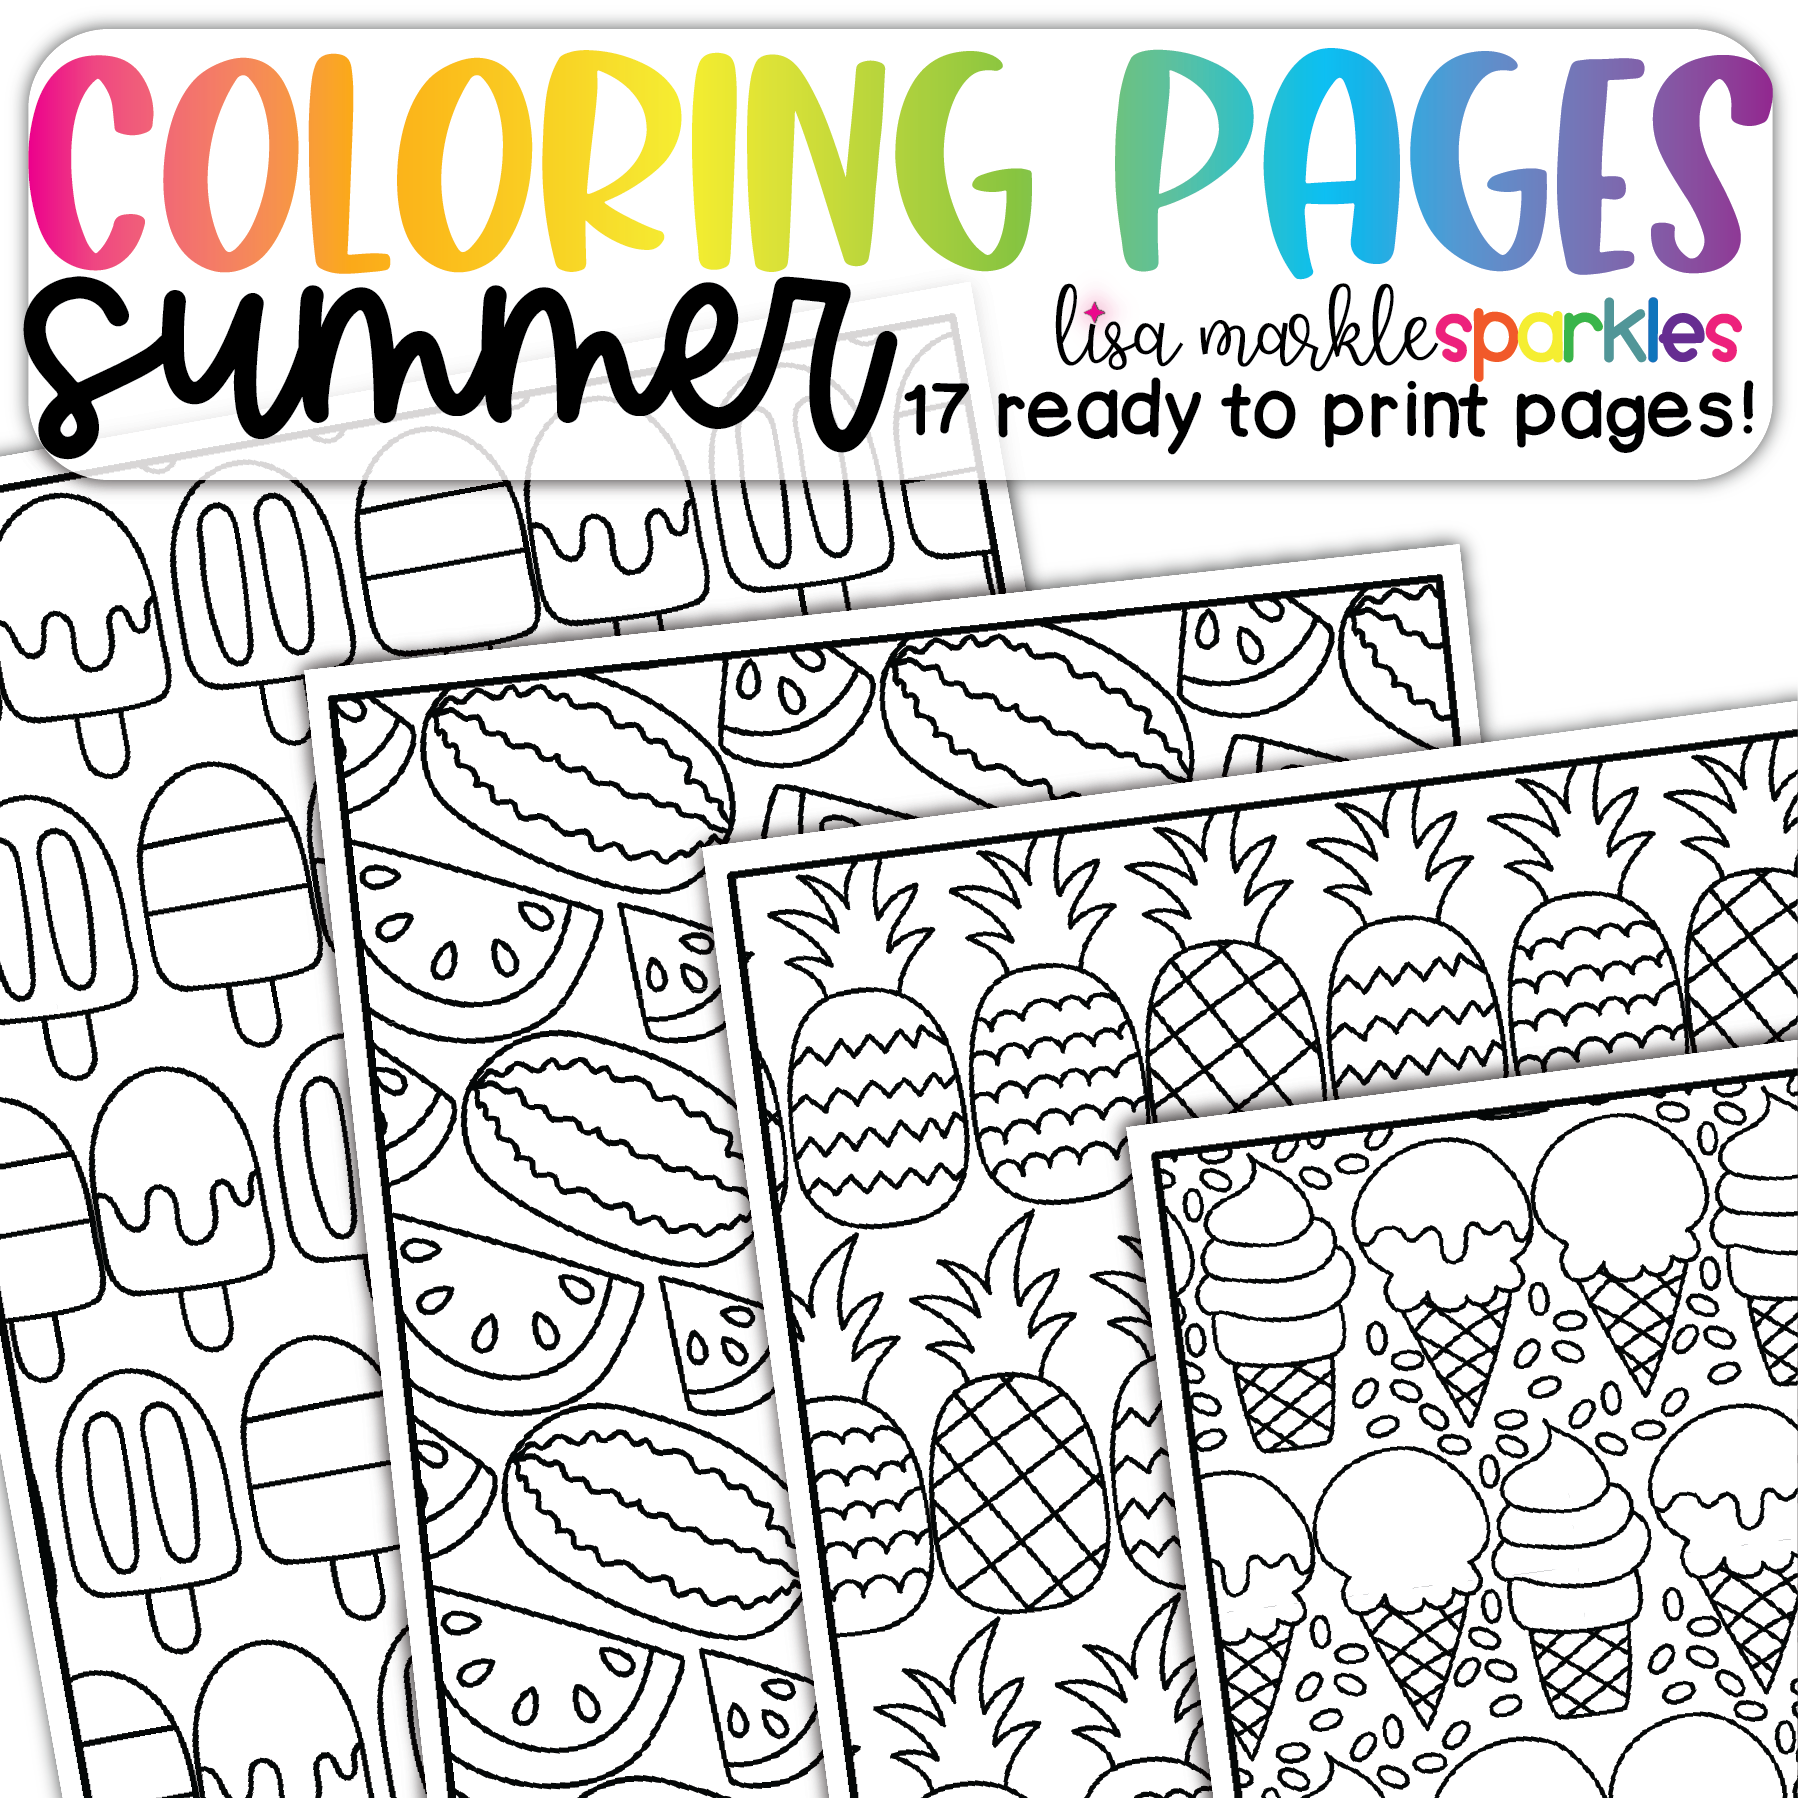 Summer printable coloring pages for kids and adults